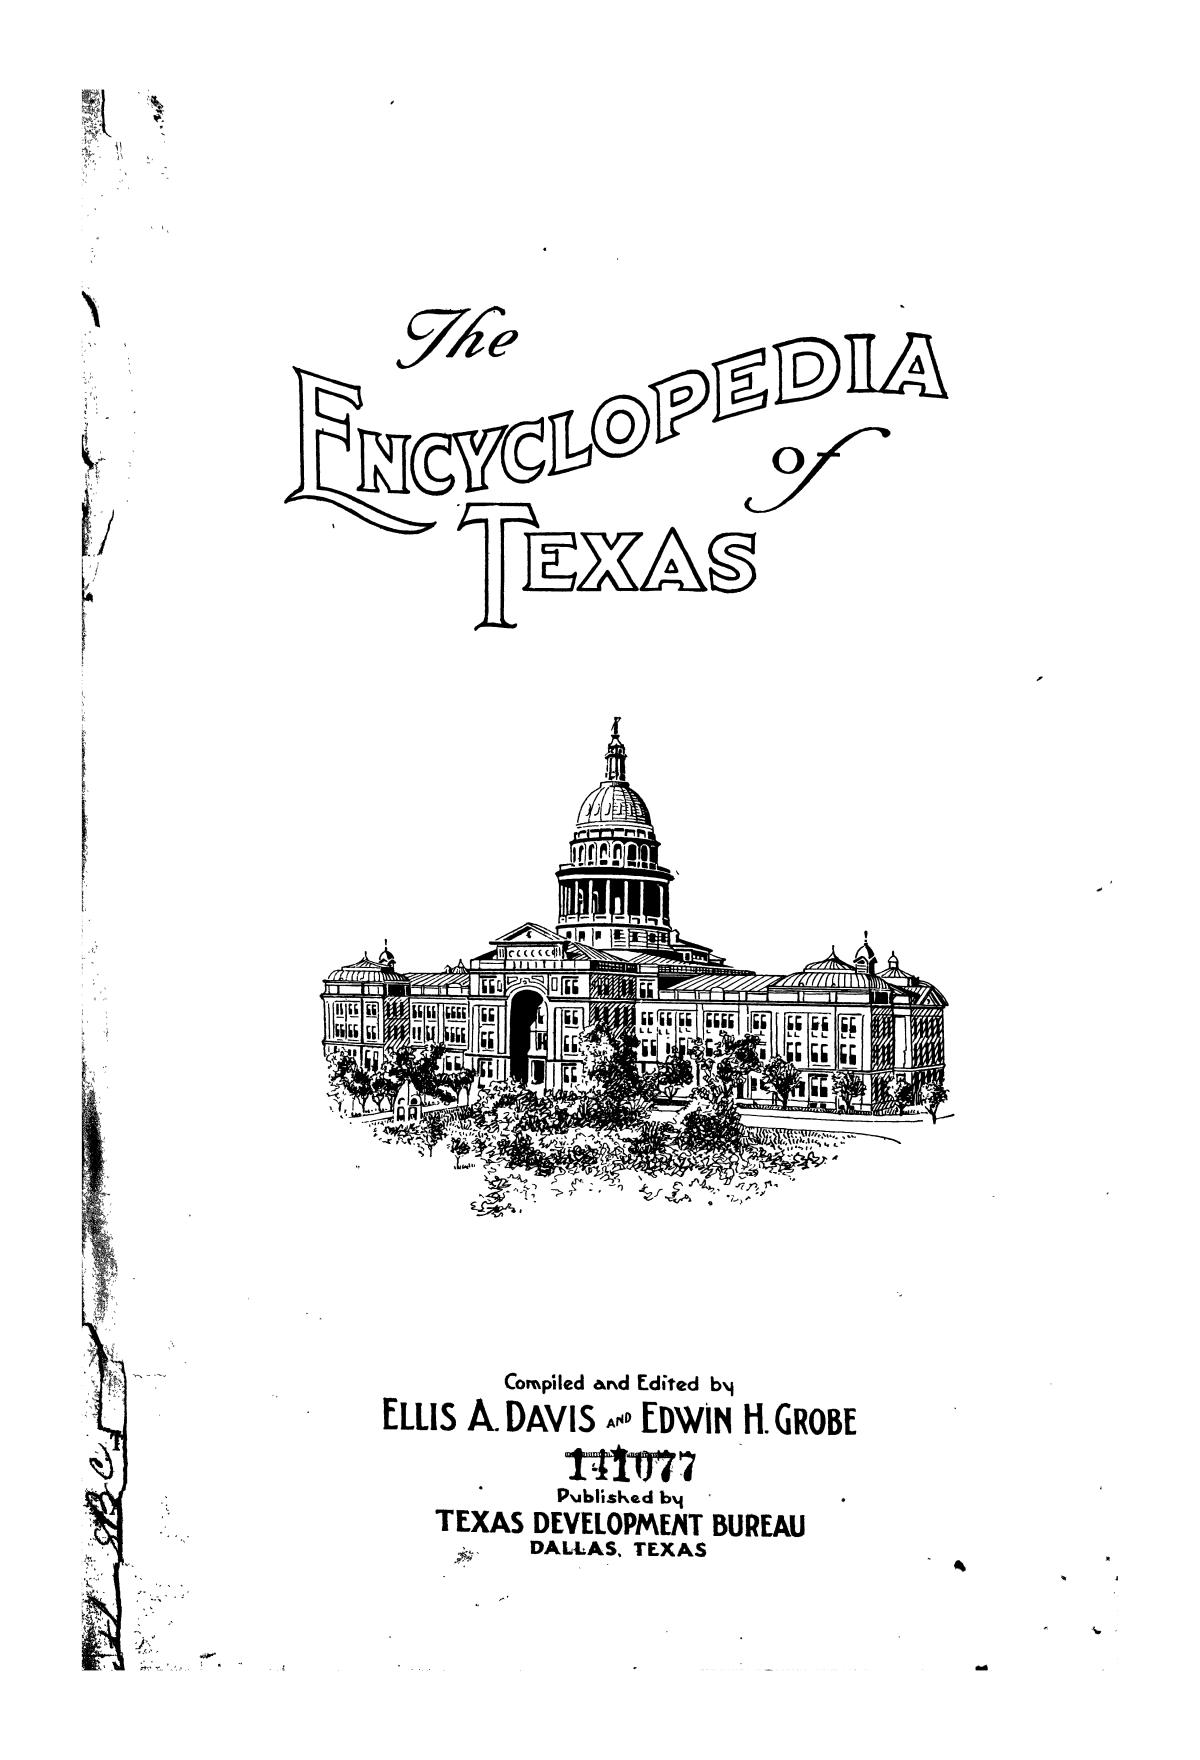 The encyclopedia of Texas, Vol. 1
                                                
                                                    Title Page
                                                